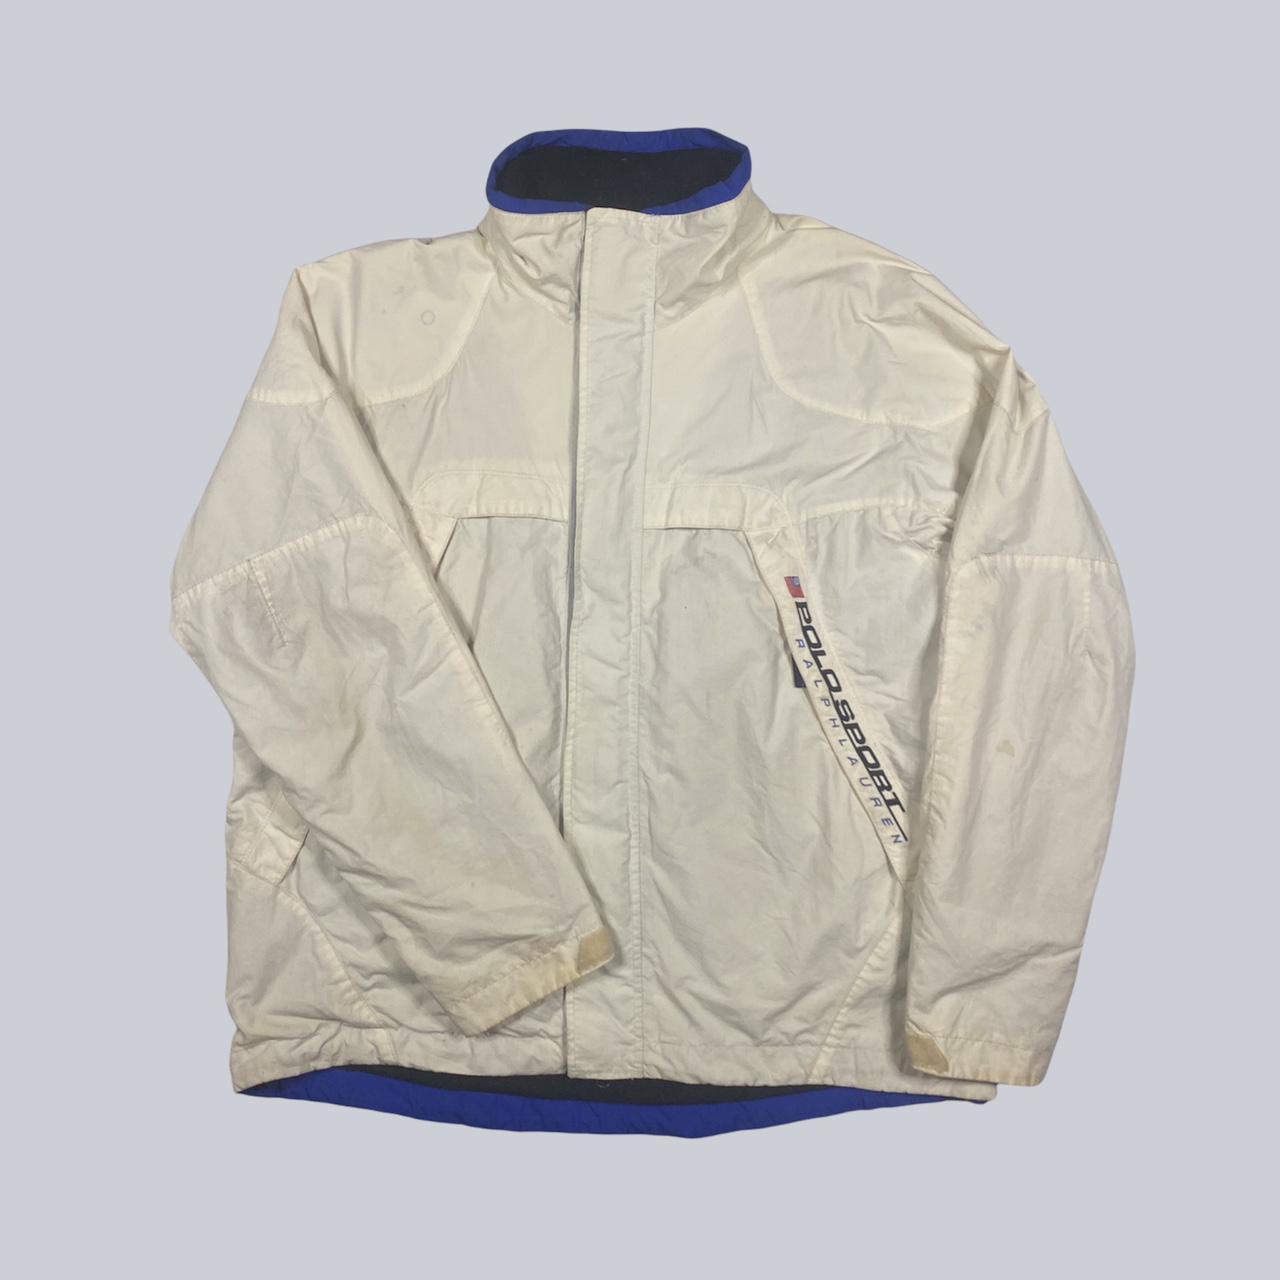 Vintage Polo Sport Jacket White with embroidered... - Depop